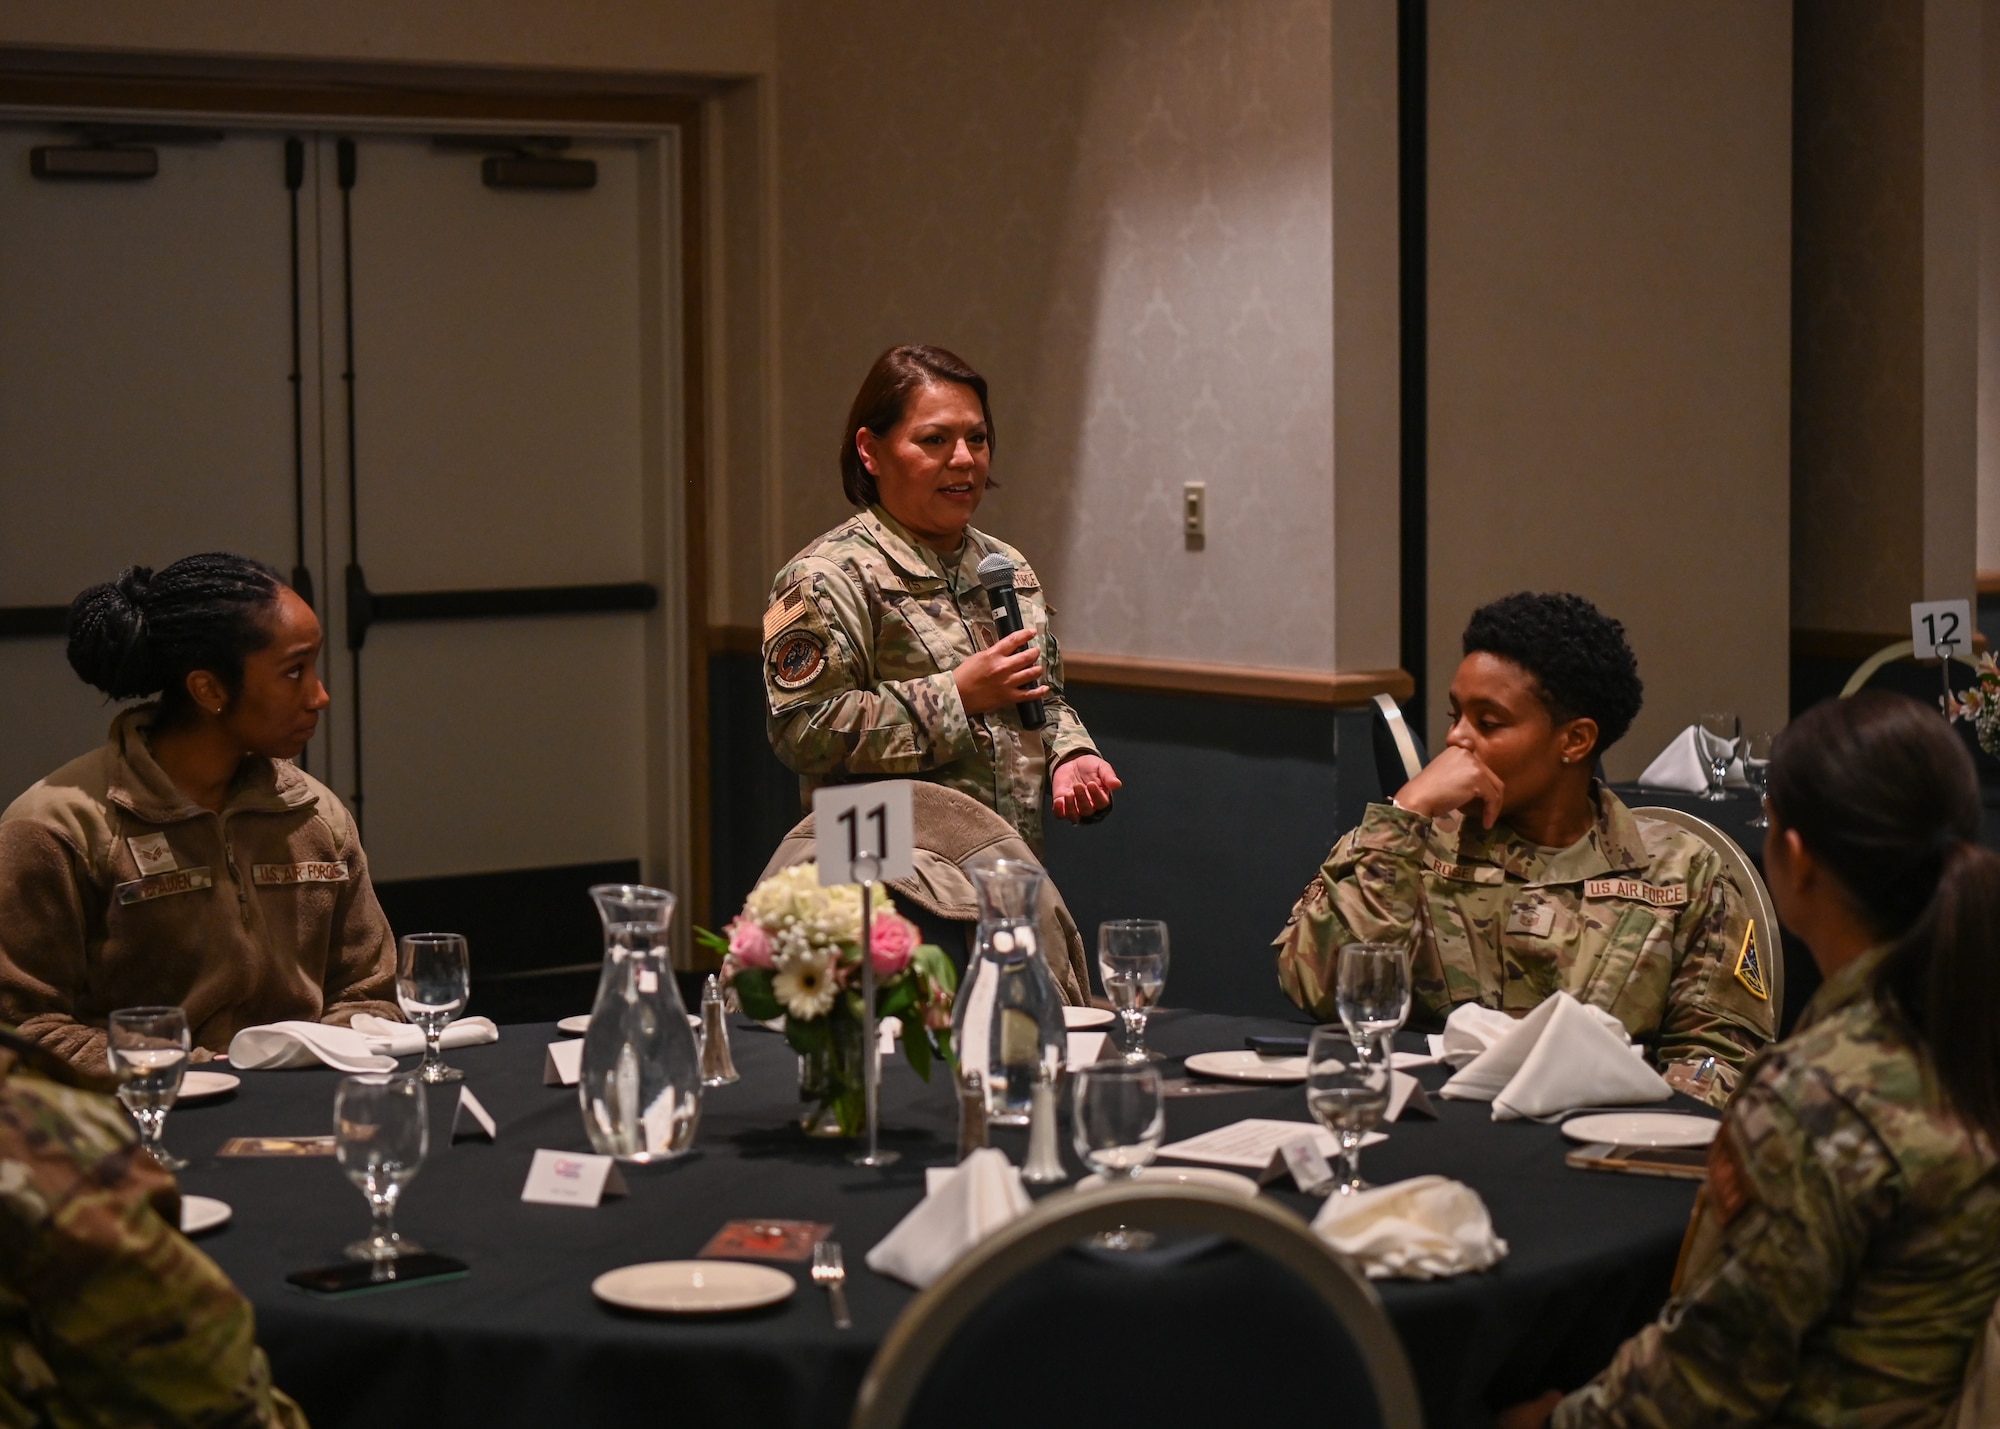 Chief Master Sgt. Diana Keys, 9th Combat Operation Squadron senior enlisted leader superintendent, speaks to the guests during the Women's History Month luncheon at Vandenberg Space Force Base, Calif., March 21, 2023. This year's Women's History Month theme, "Celebrating Women Who Tell Our Stories," acknowledges the pioneering women, past and present, as important contributors to the achievements of the military services and civilian workforce. (U.S. Space Force photo by Senior Airman Tiarra Sibley)